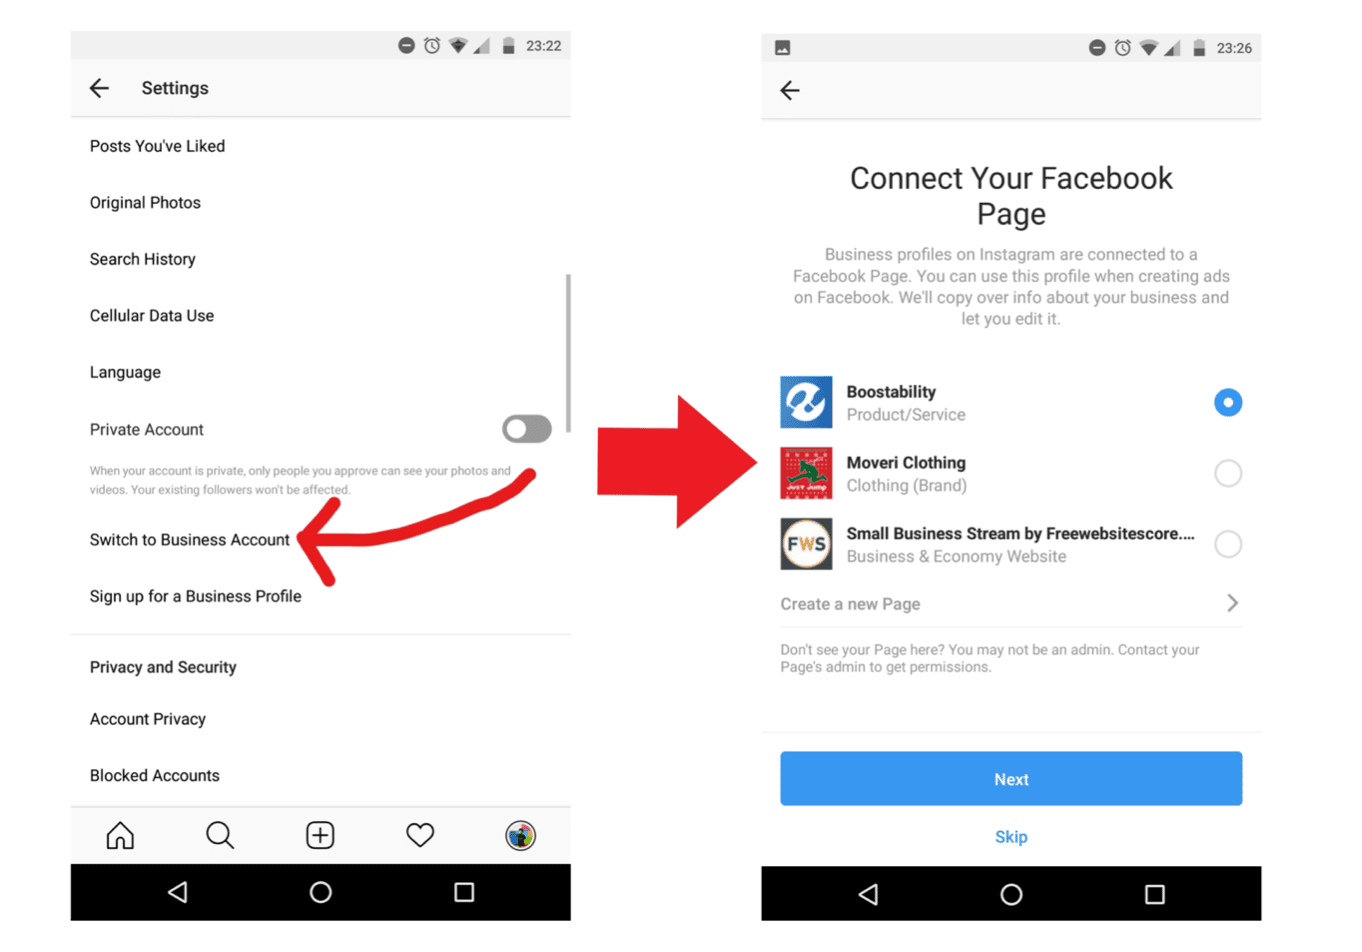 Facebook business settings changes for Woo Commerce Instagram integration